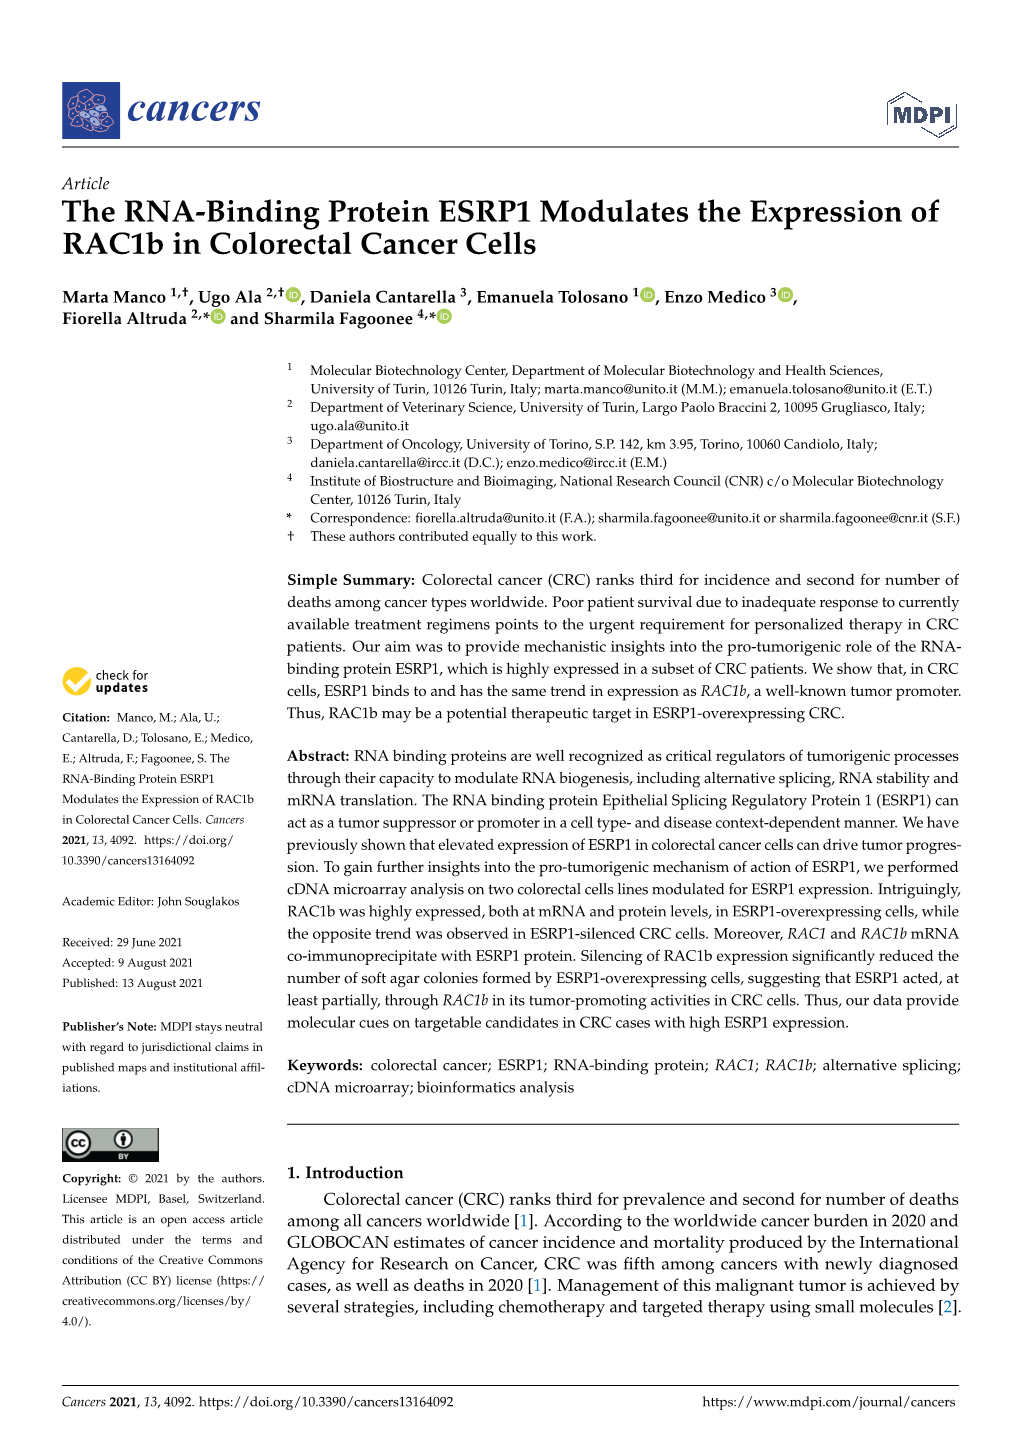 The RNA-Binding Protein ESRP1 Modulates the Expression of Rac1b in Colorectal Cancer Cells